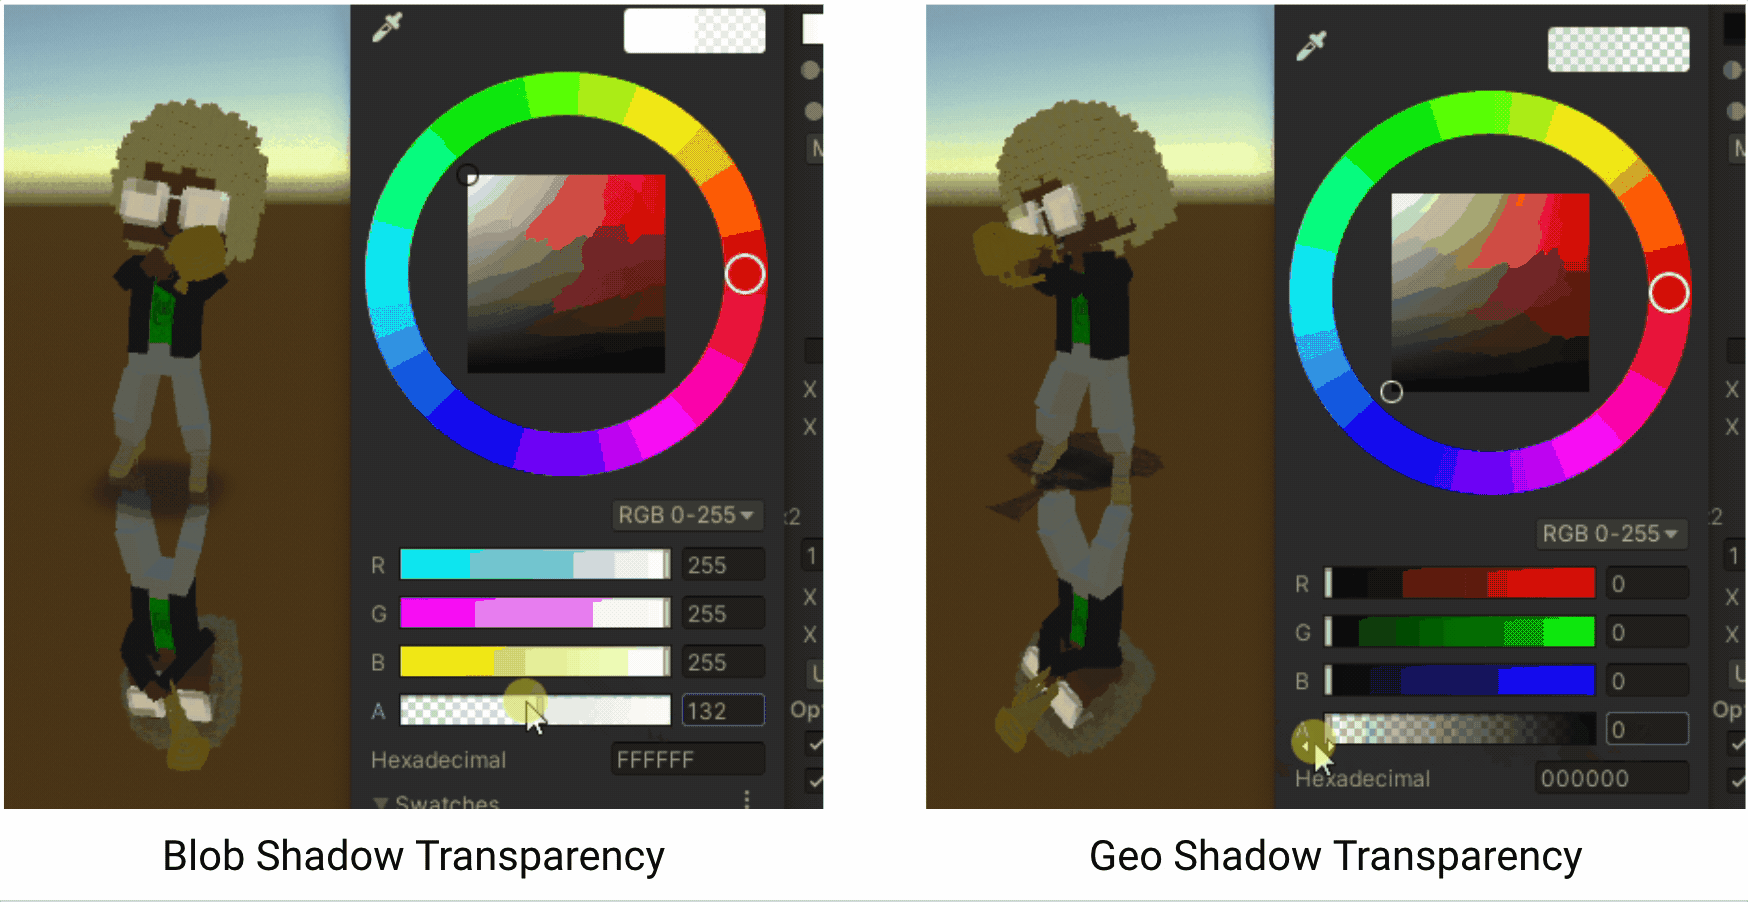 Two images of a Blockstar playing the trumpet on a blank development canvas. Each has a different form of shadow. The image shows how the shadow type impacts transparency.